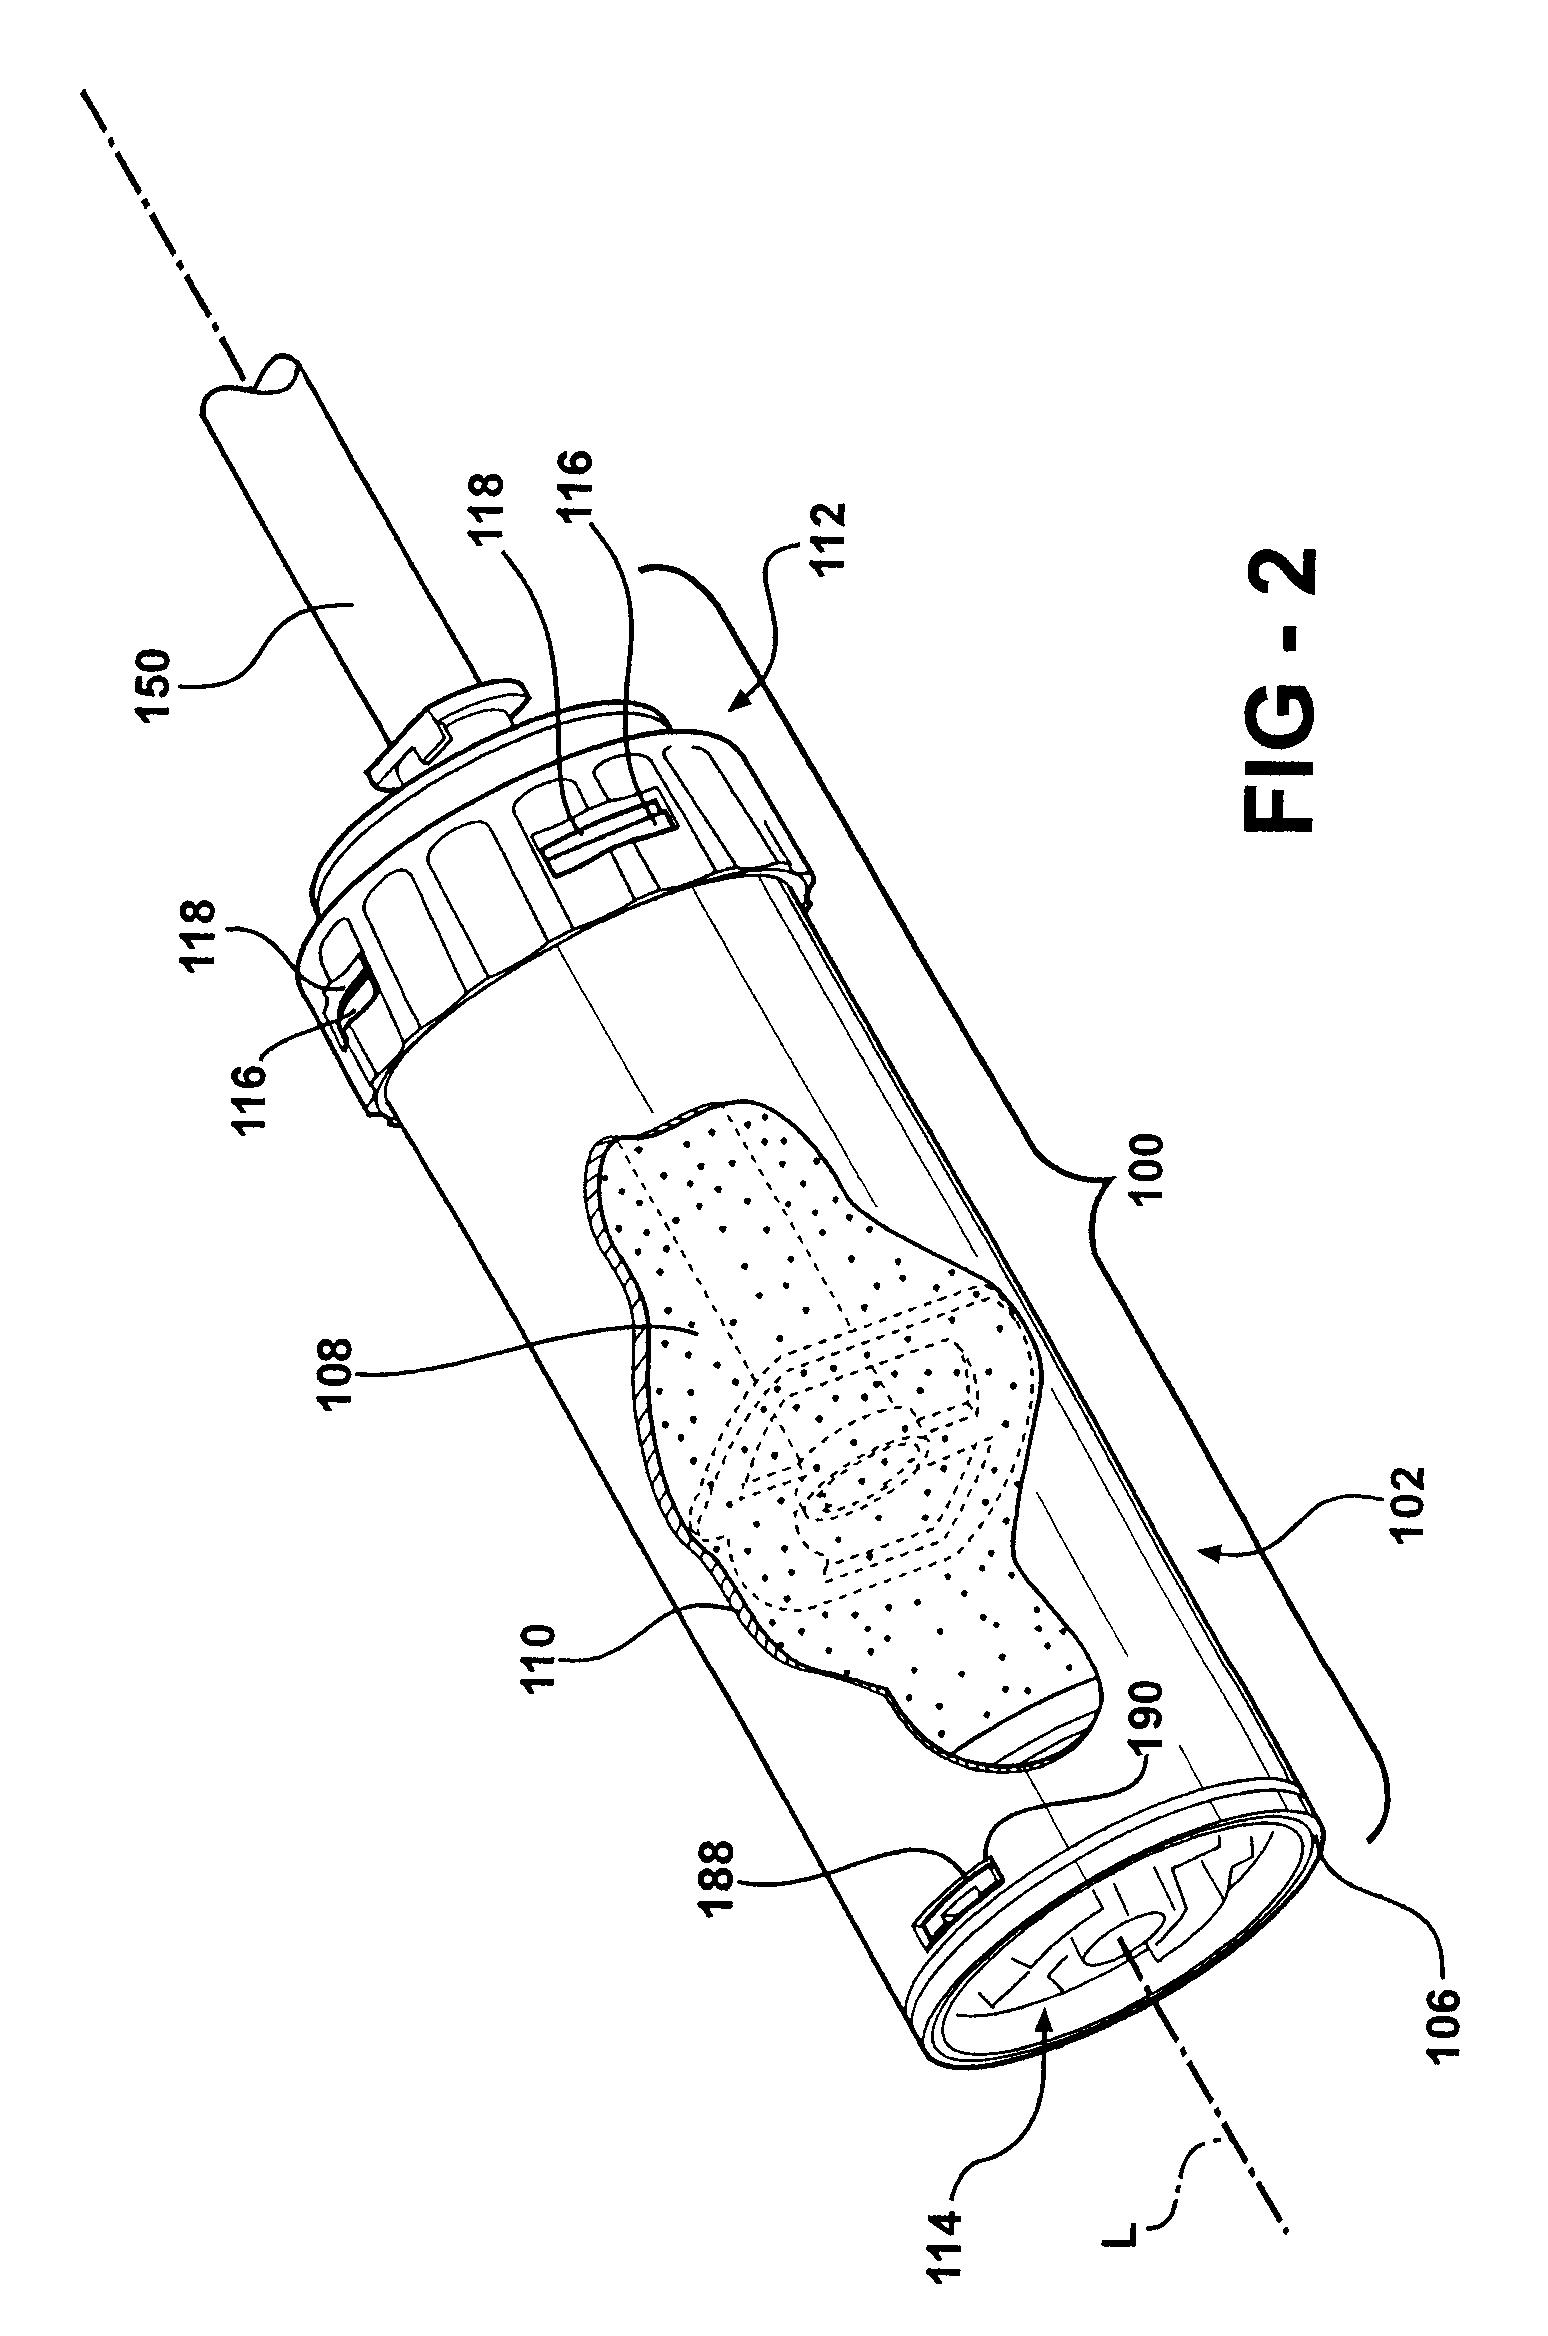 Bone cement mixing and delivery system including a delivery gun and a cartridge having a piston, the delivery gun configured to release the piston